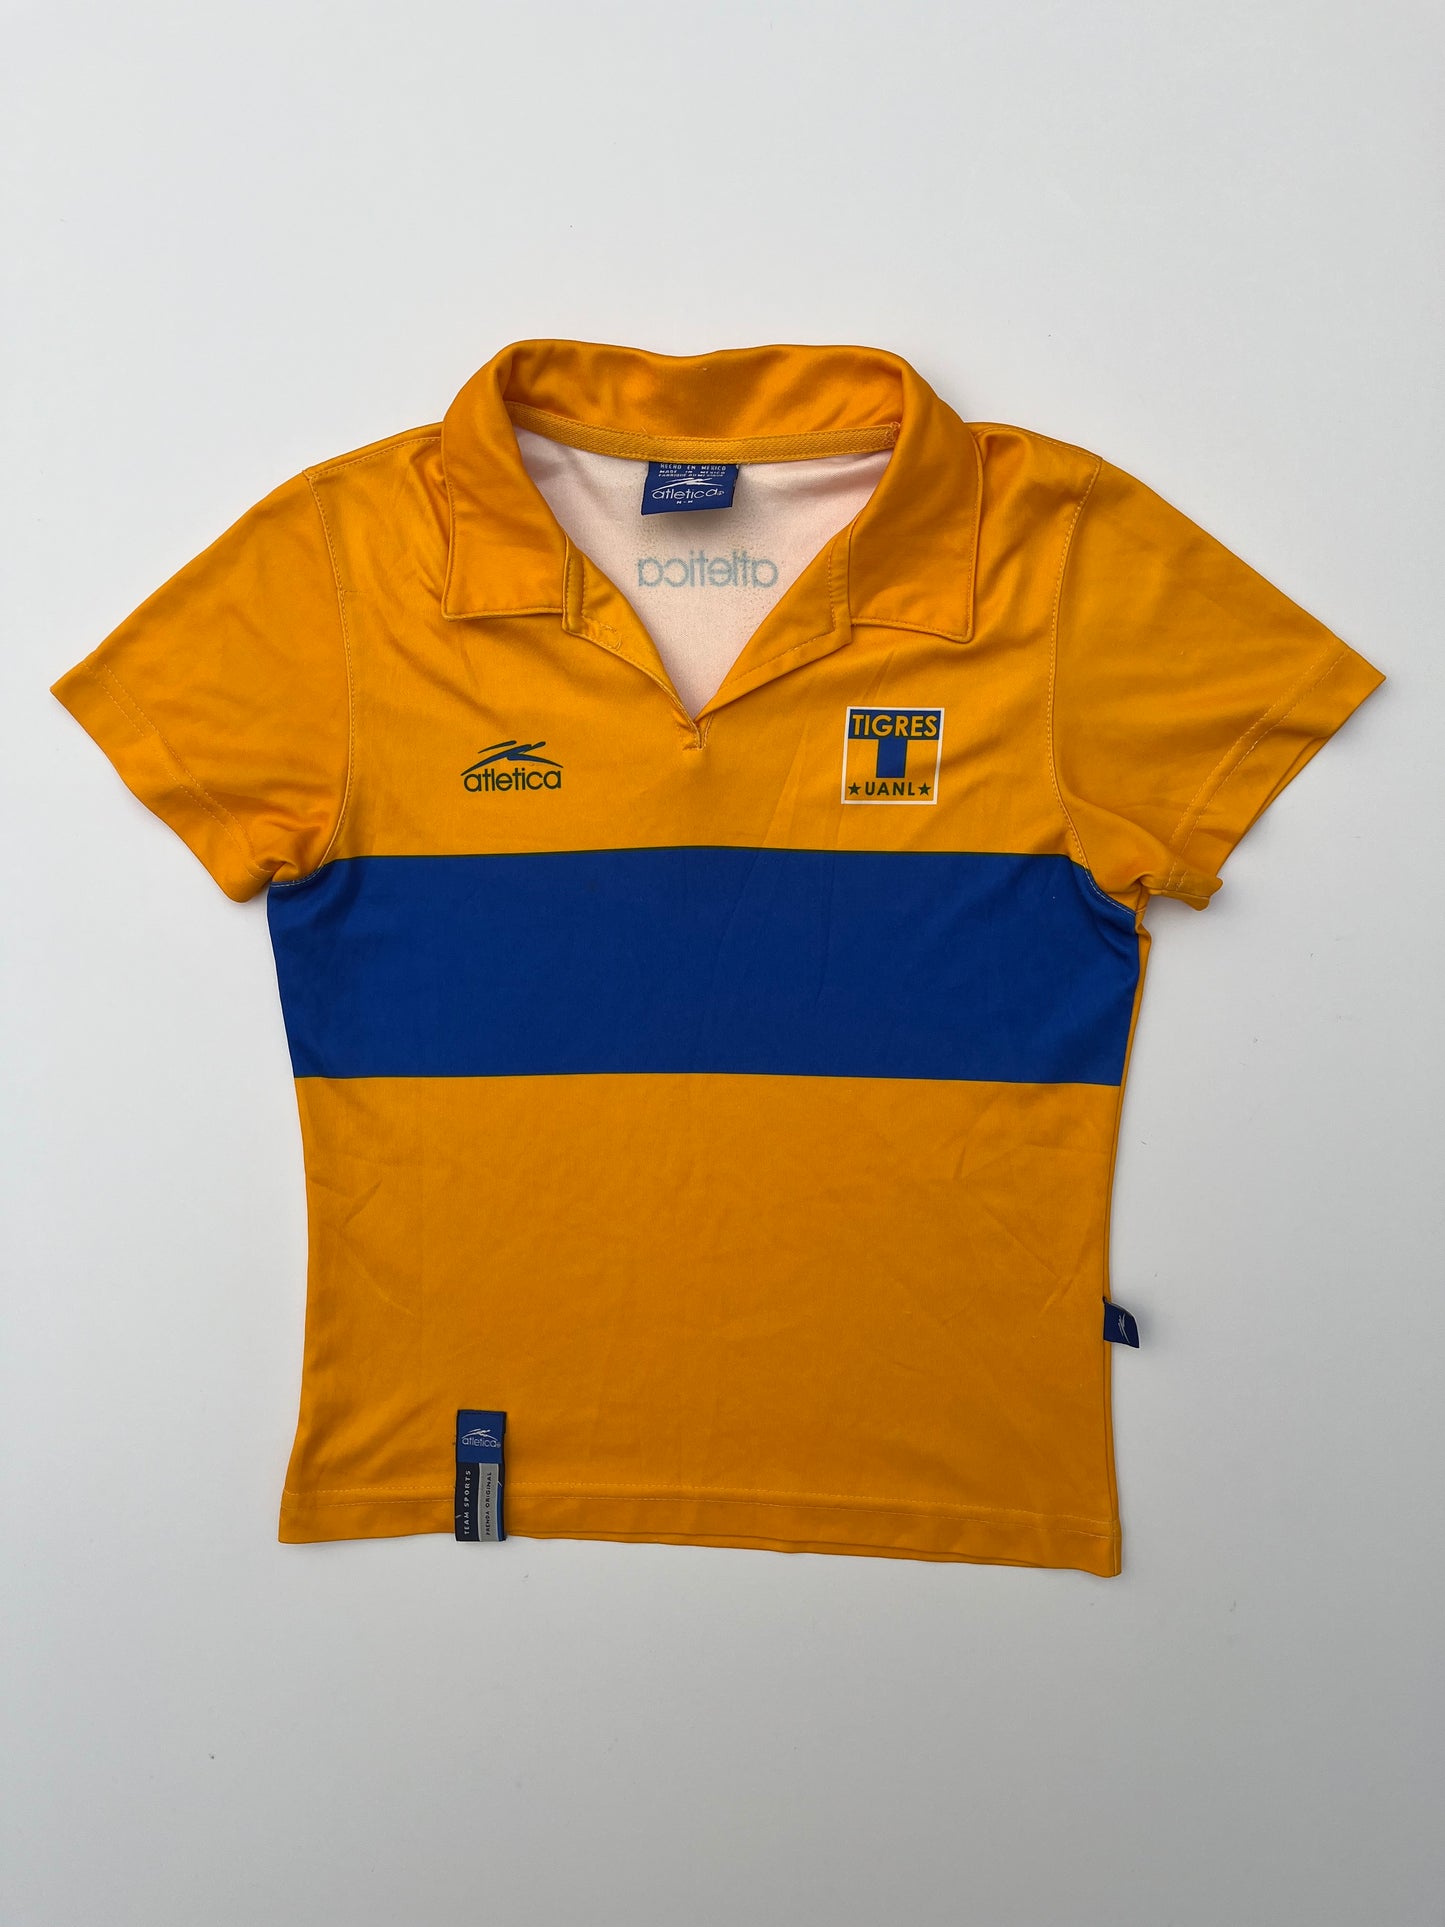 Jersey Tigres Local 2003 2004 (M mujer)